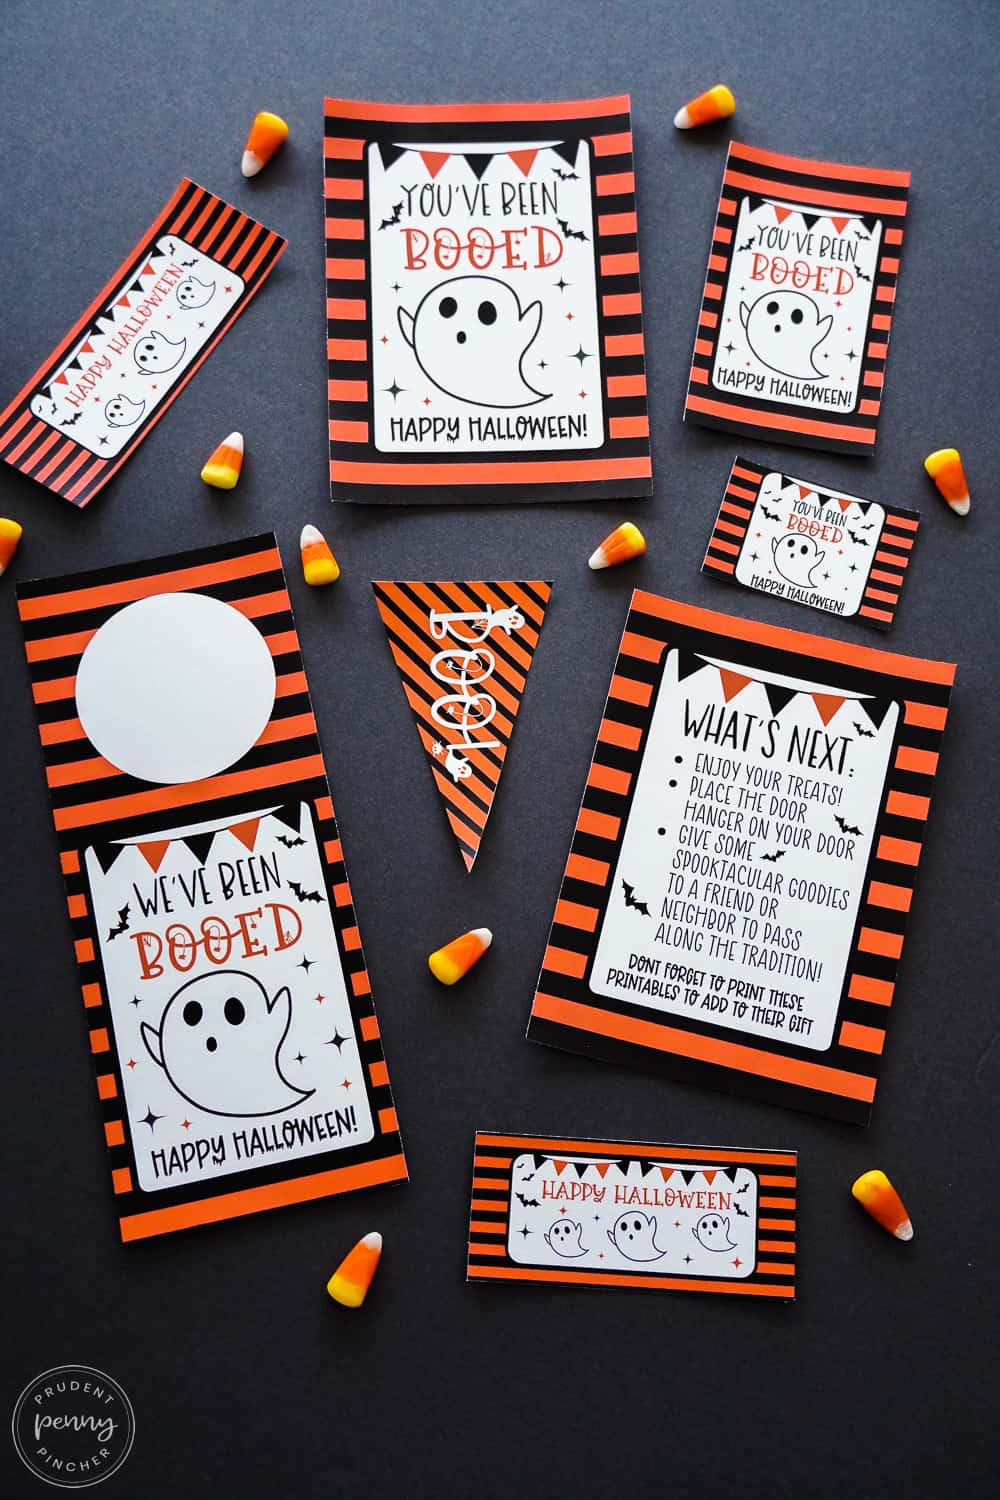 signs, tags and flag surrounded by candy corn on a black background